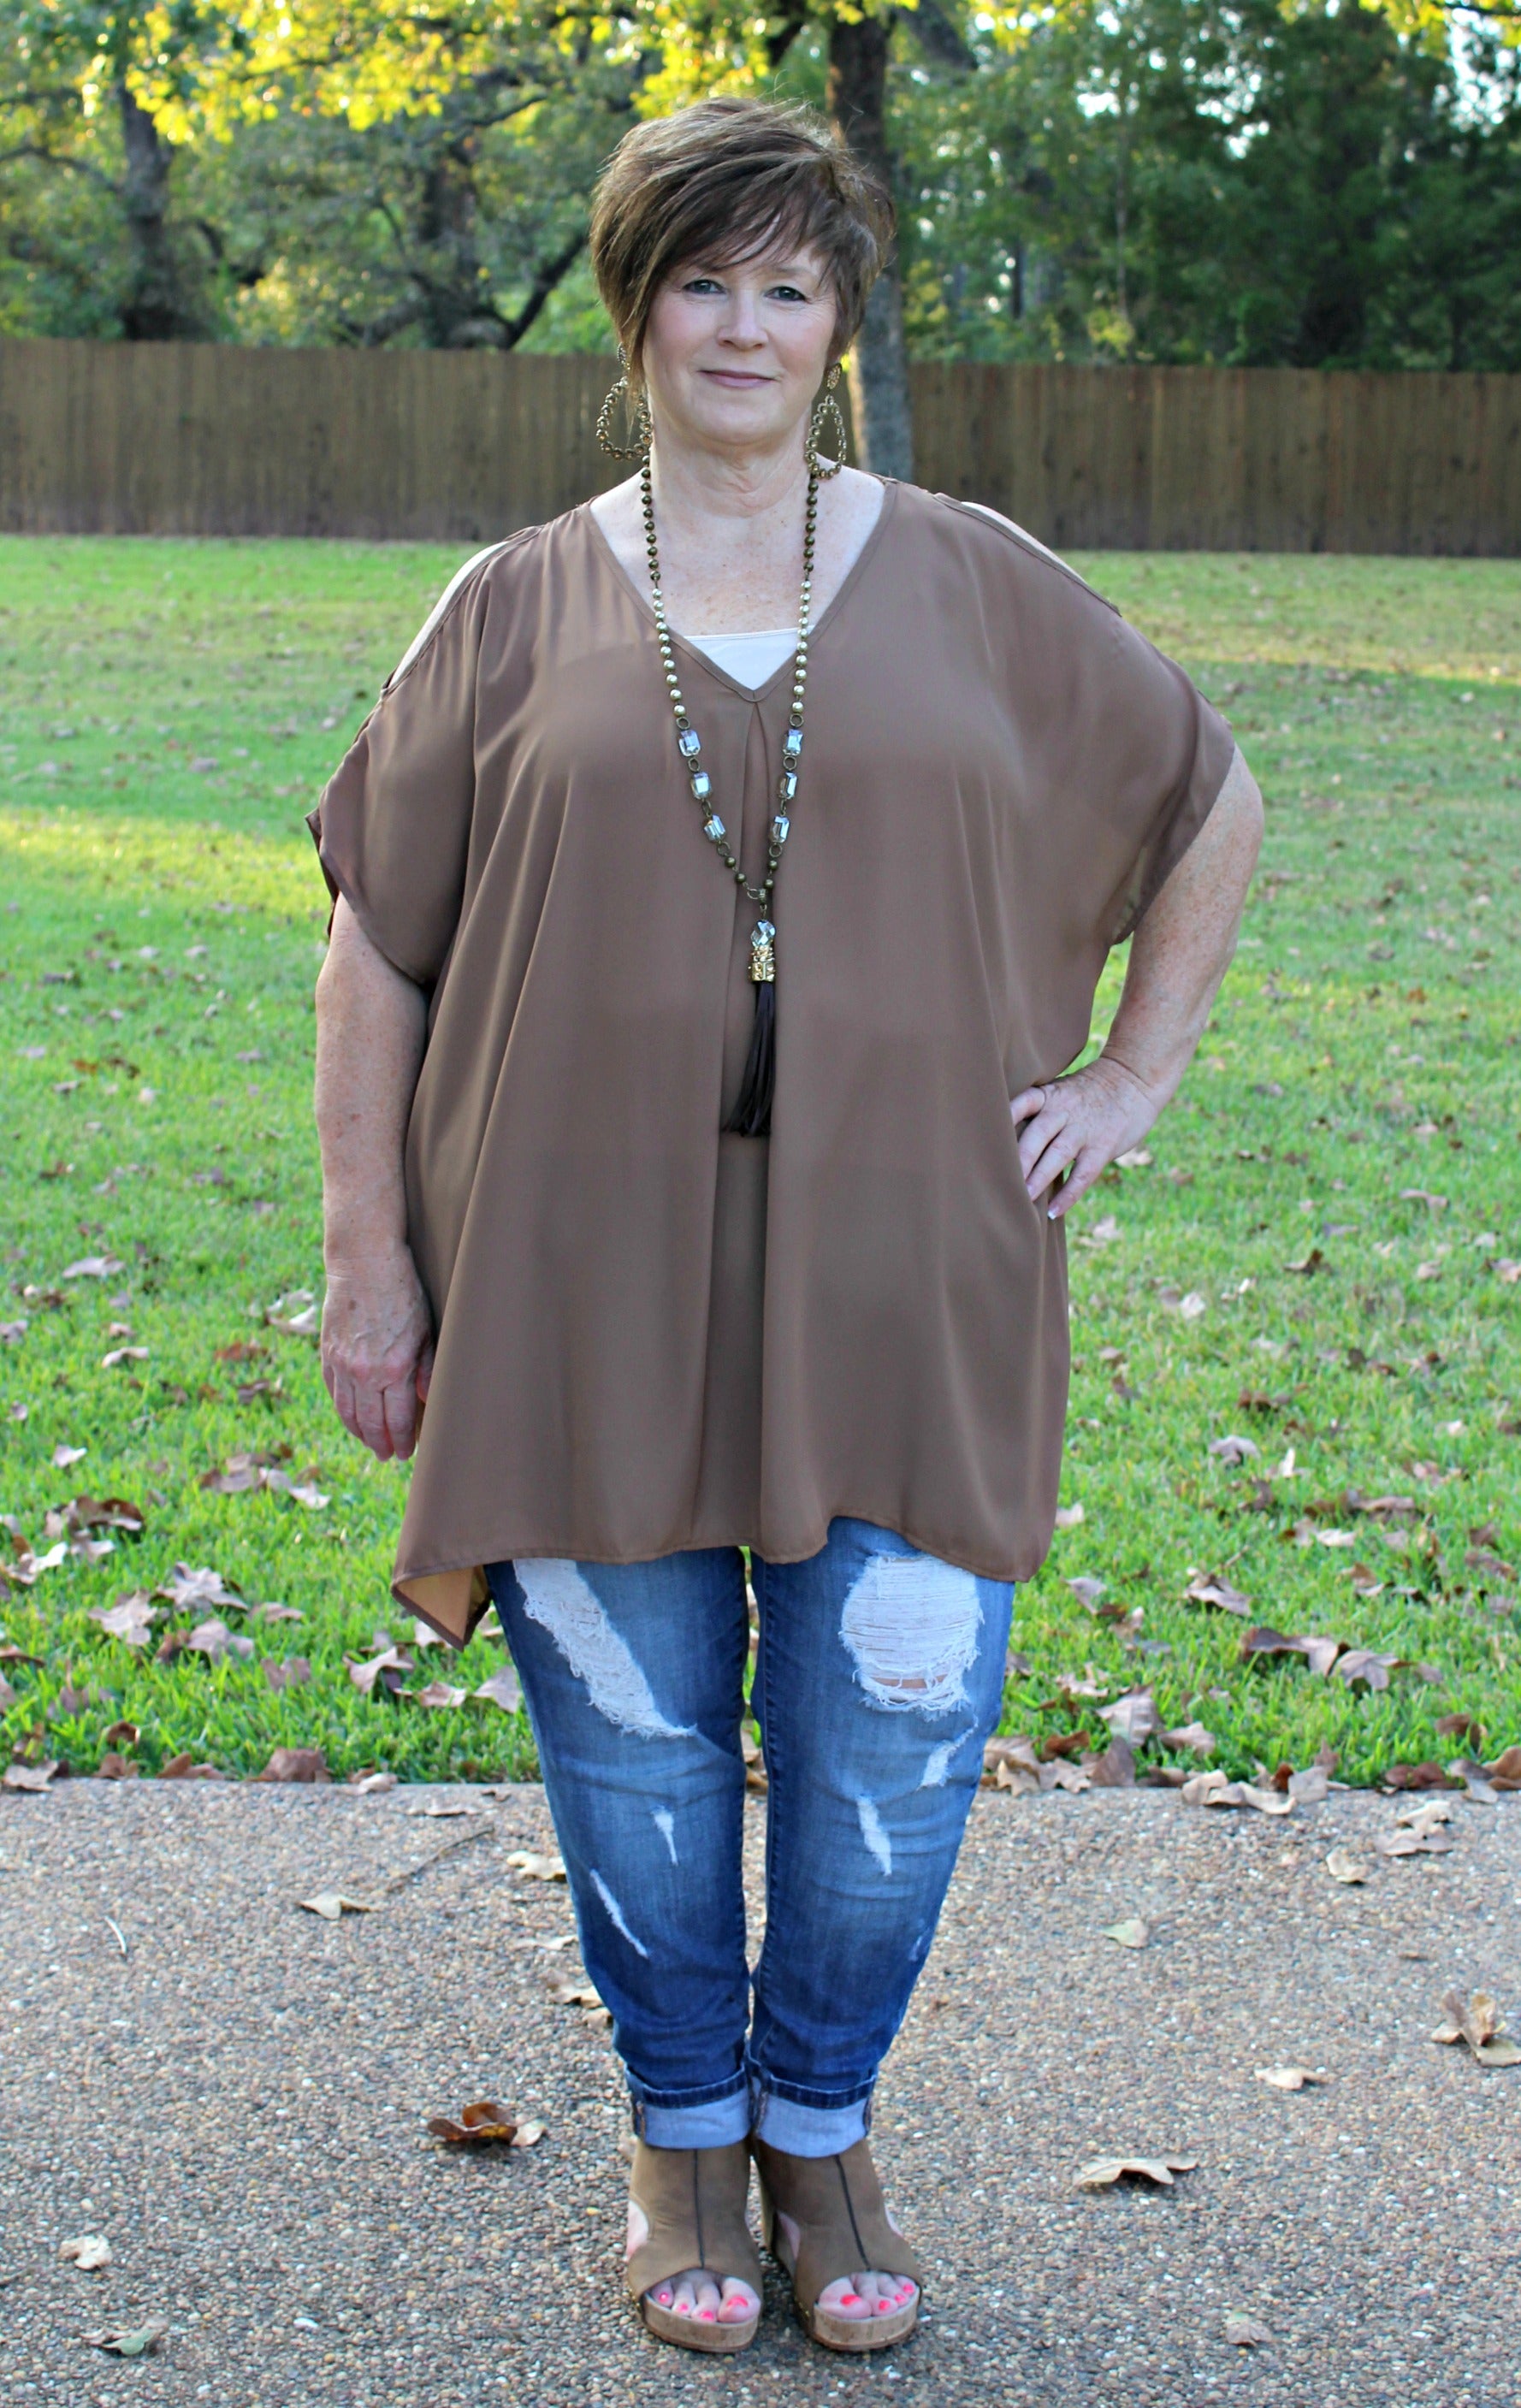 Last Chance Size Small | Pretty Little Thing Sheer Open Shoulder Tunic in Mocha - Giddy Up Glamour Boutique